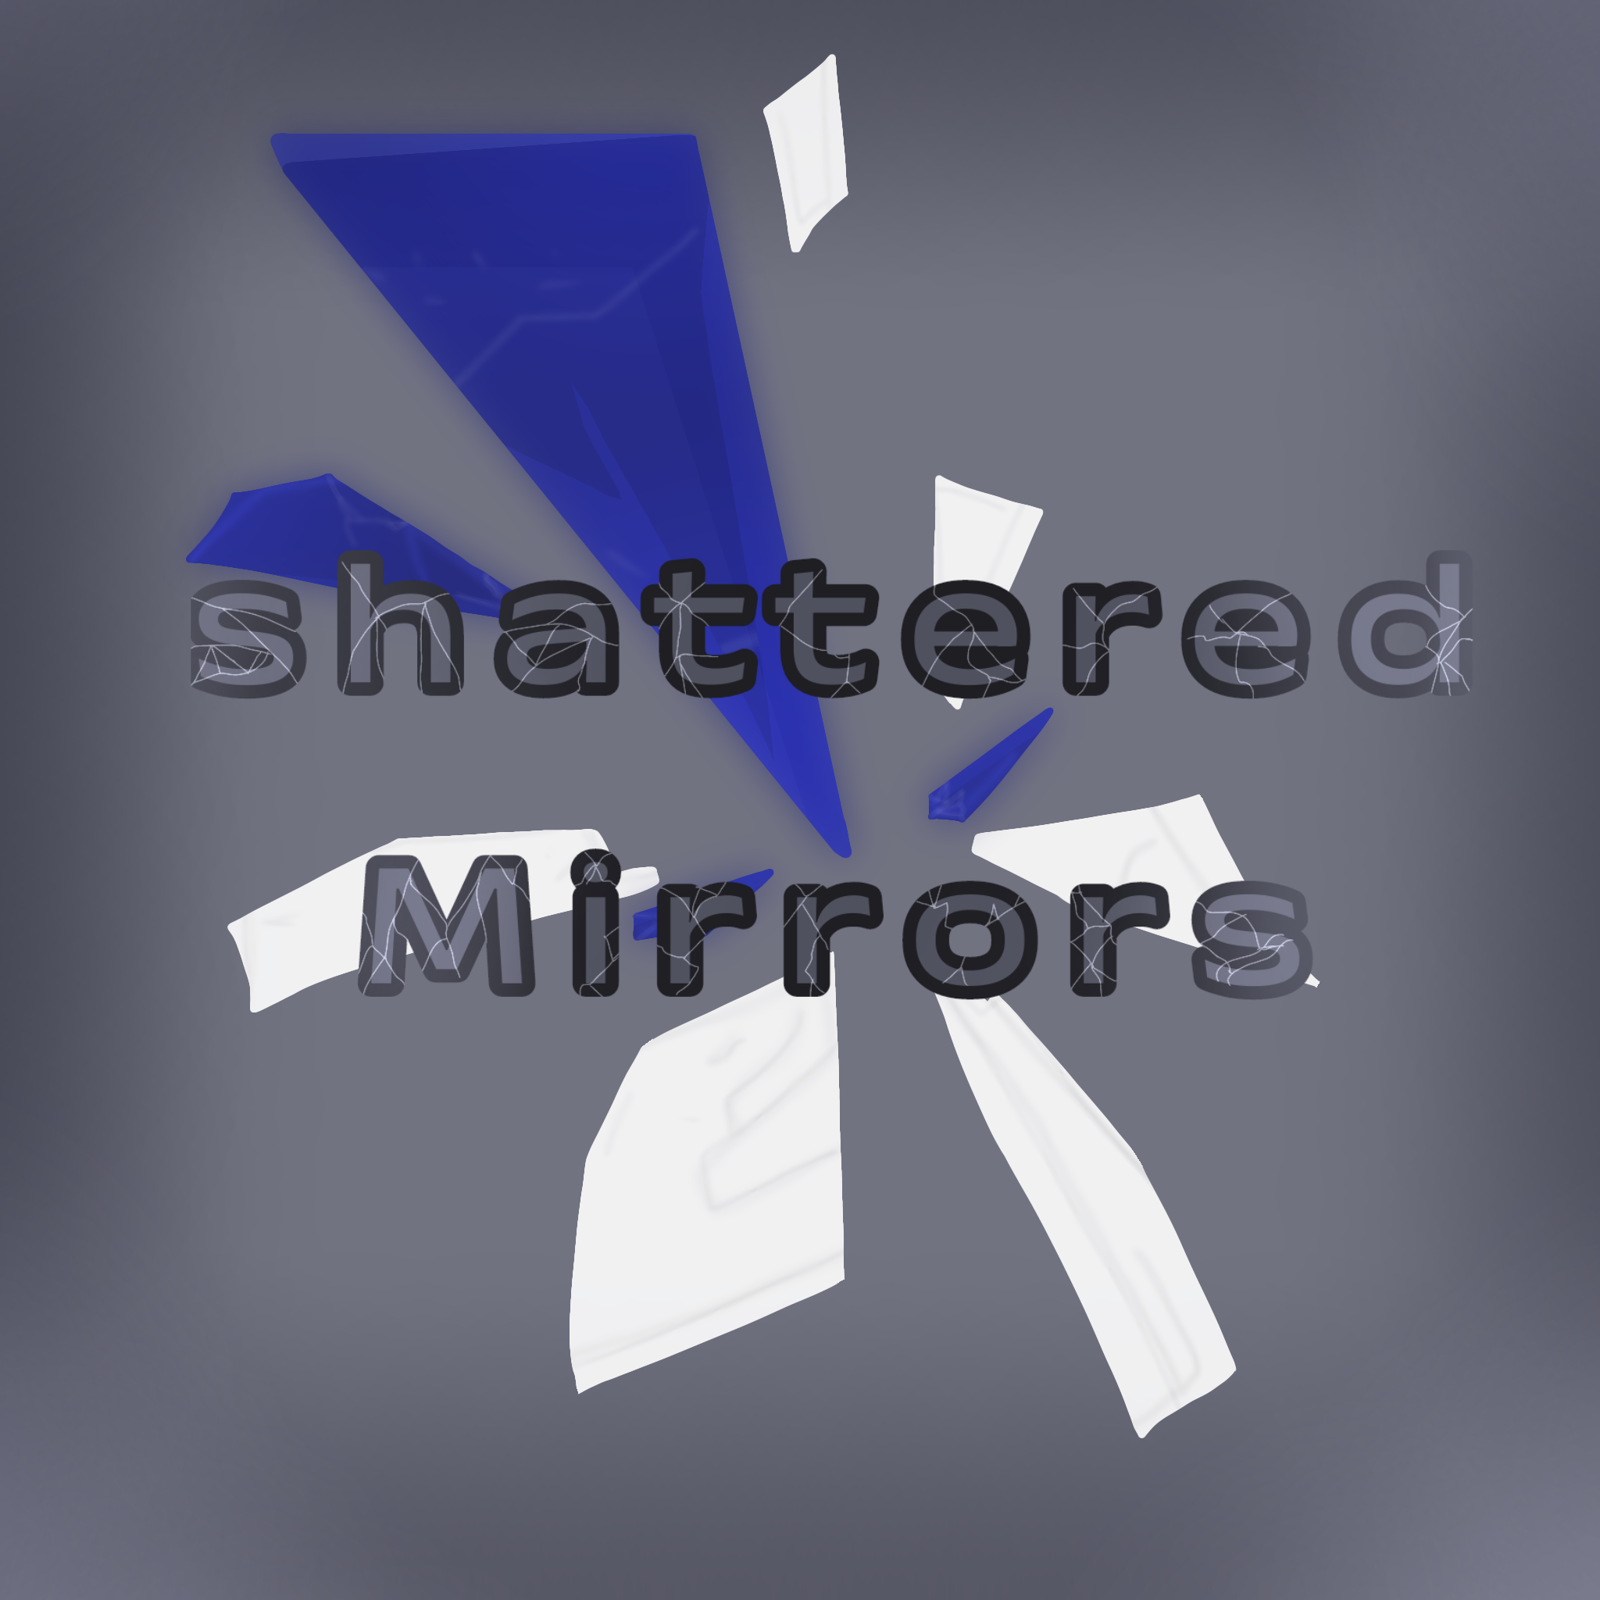 Shattered Mirrors